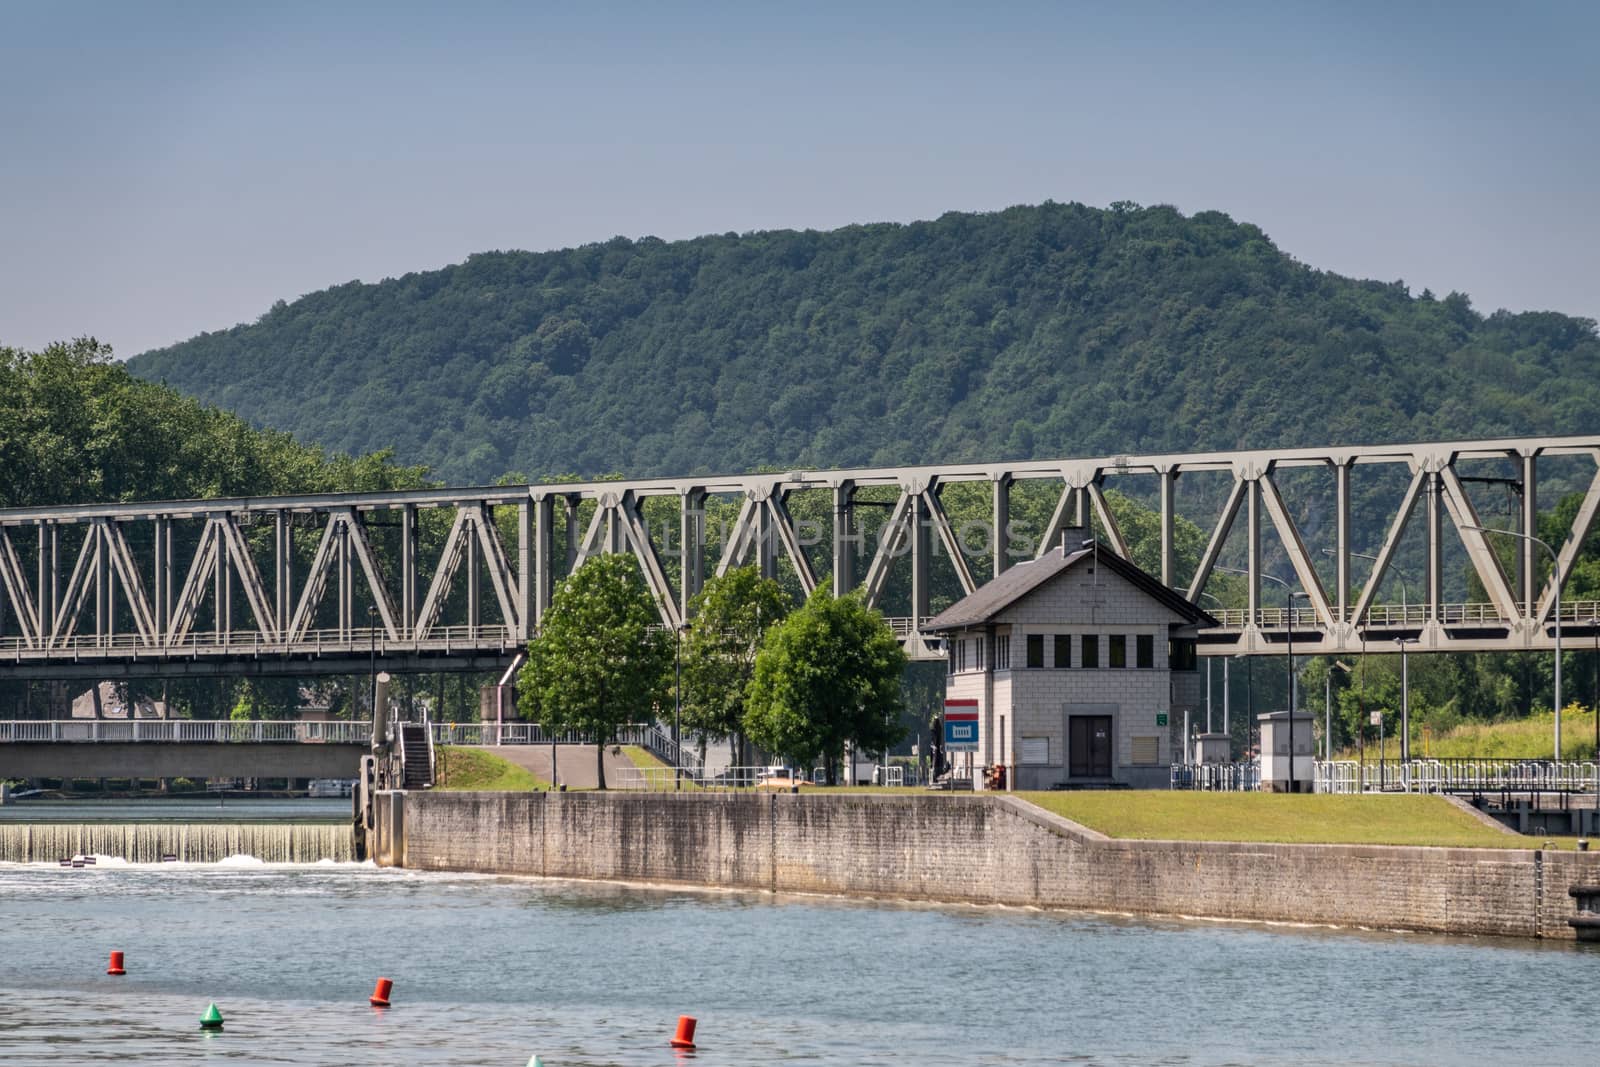 Dinant, Belgium - June 26, 2019: Gray lock operator office building with train bridge span over it against forested hill and blue sky. Rapids to the left.